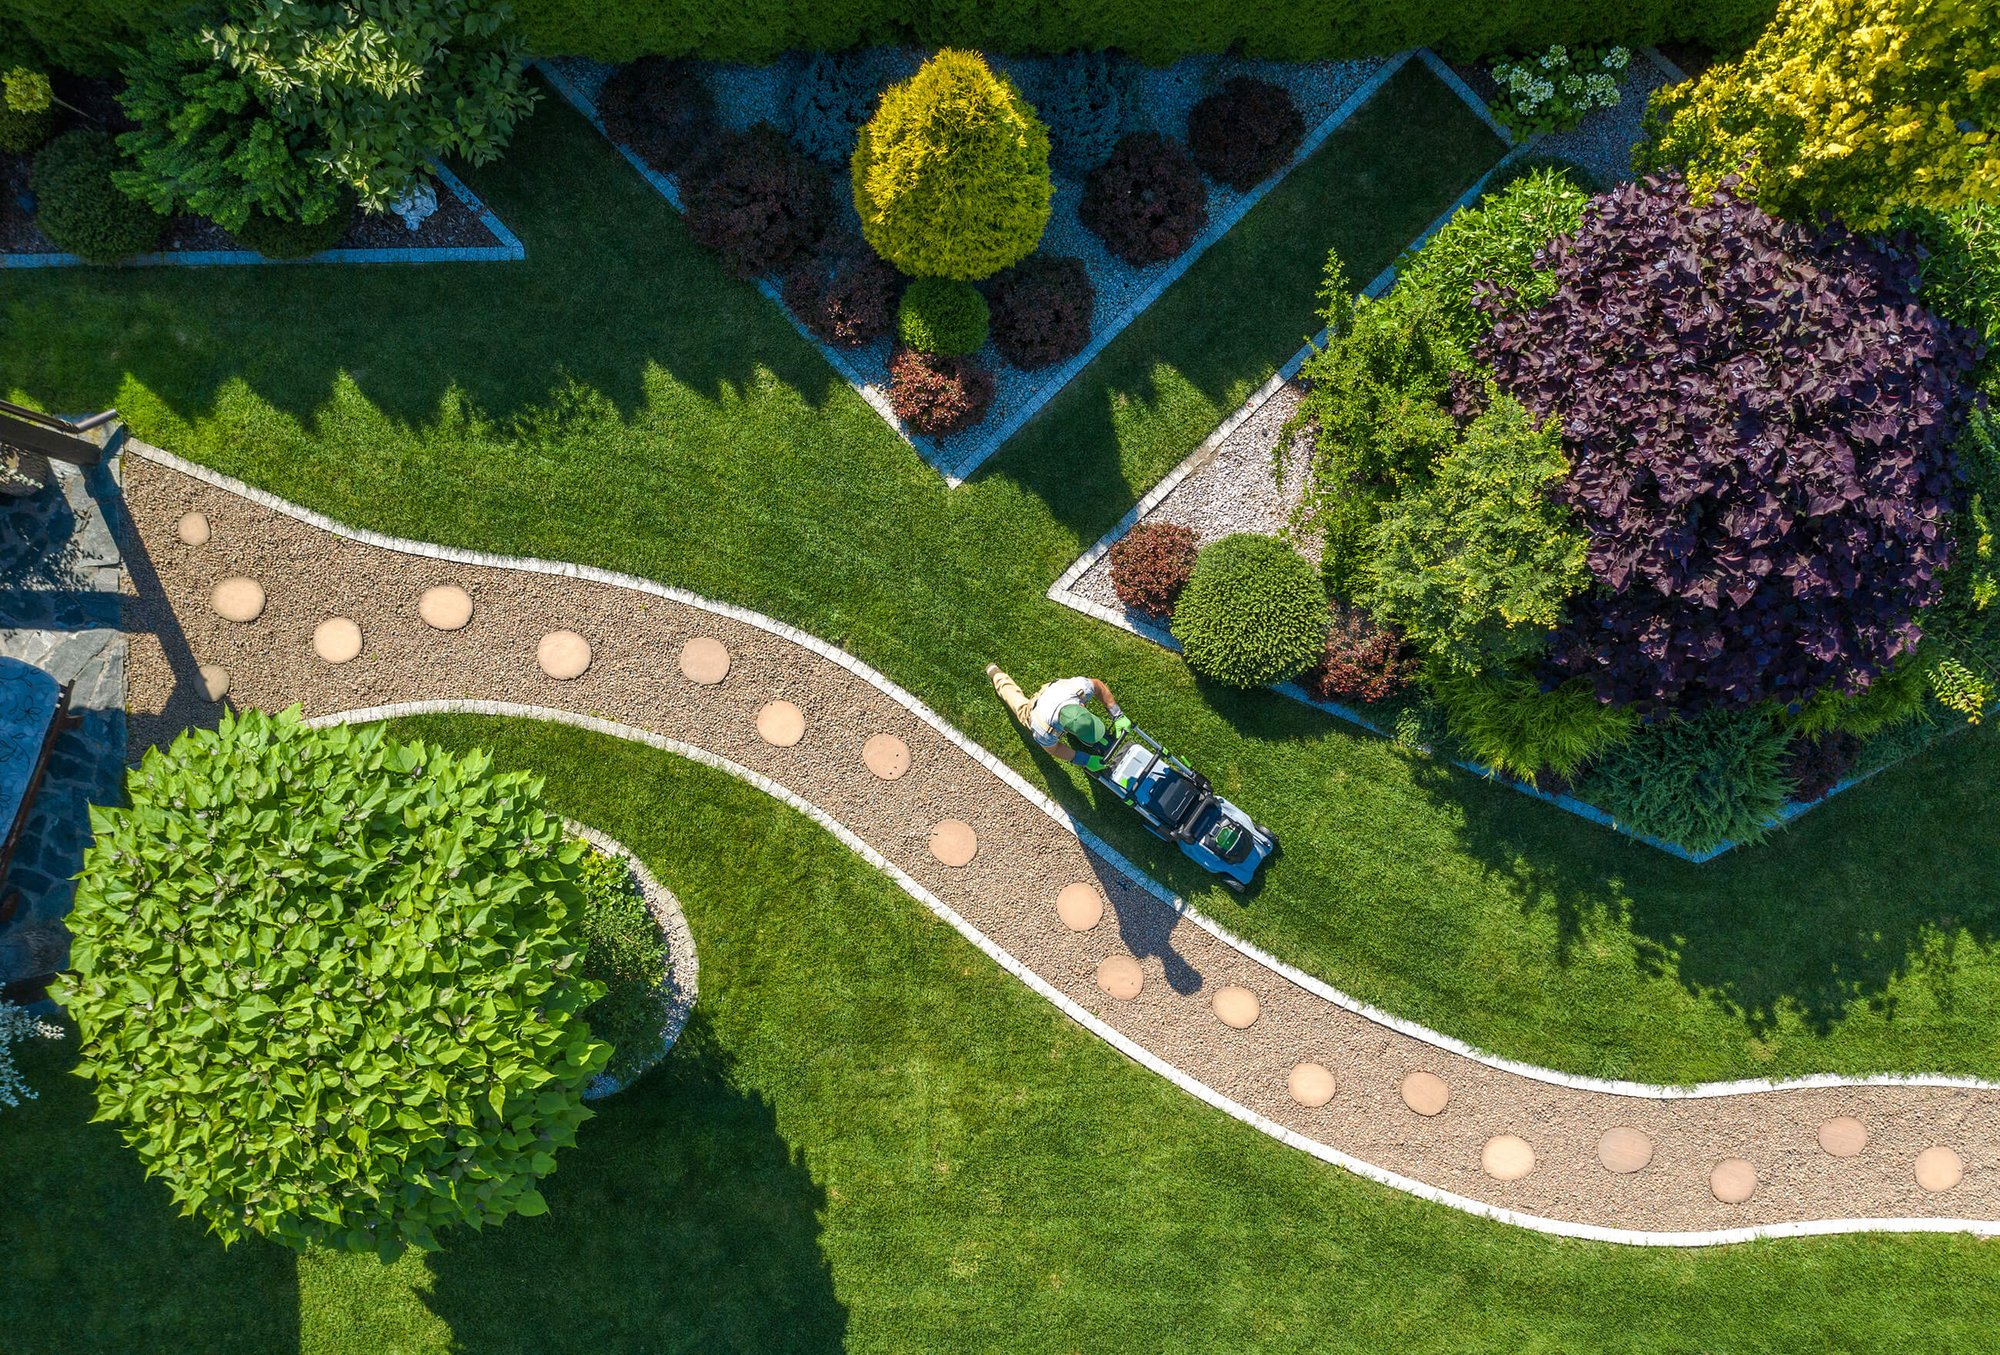 Aerial view of a DAVACO landscaping professional pushing a lawnmower through a perfectly groomed lawn surrounded by lush greenery and foliage.